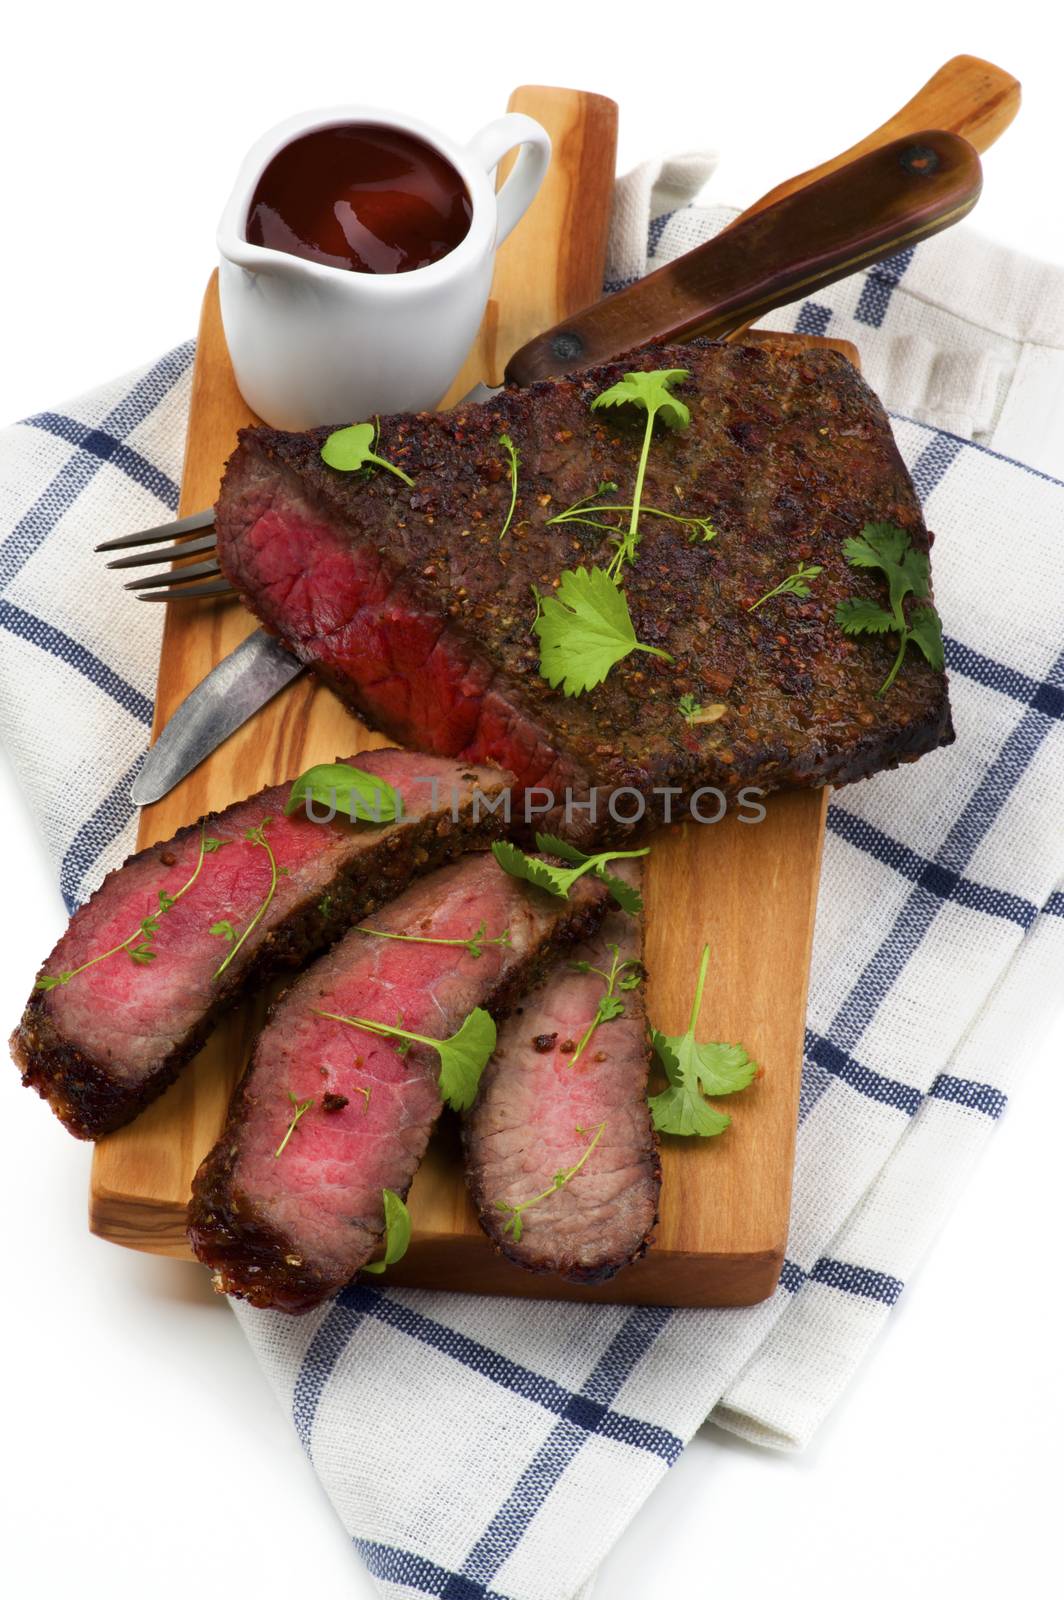 Delicious Roast Beef Medium Rare Sliced on Wooden Cutting Board with Tomato Sauce, Fork and Table Knife closeup on Checkered Napkin